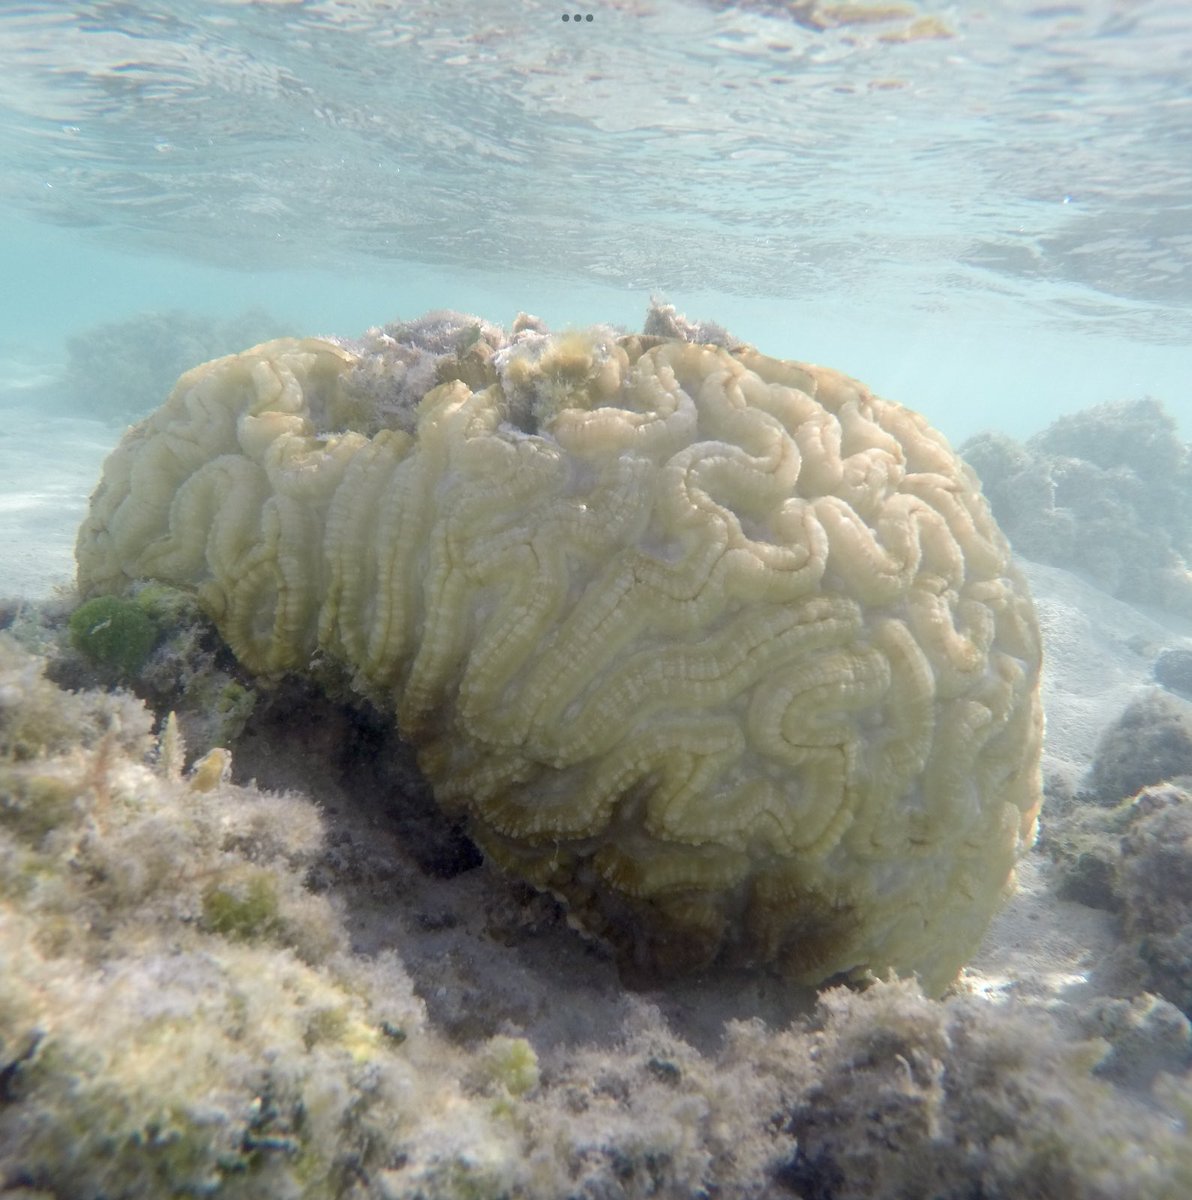 This is a very sick, bleached brain-coral on the reef flat at Heron Island, 2 weeks ago. It was the sole surviving colony of this species that I could find. The rest died when sea temperatures on the reef flat reached 34C.